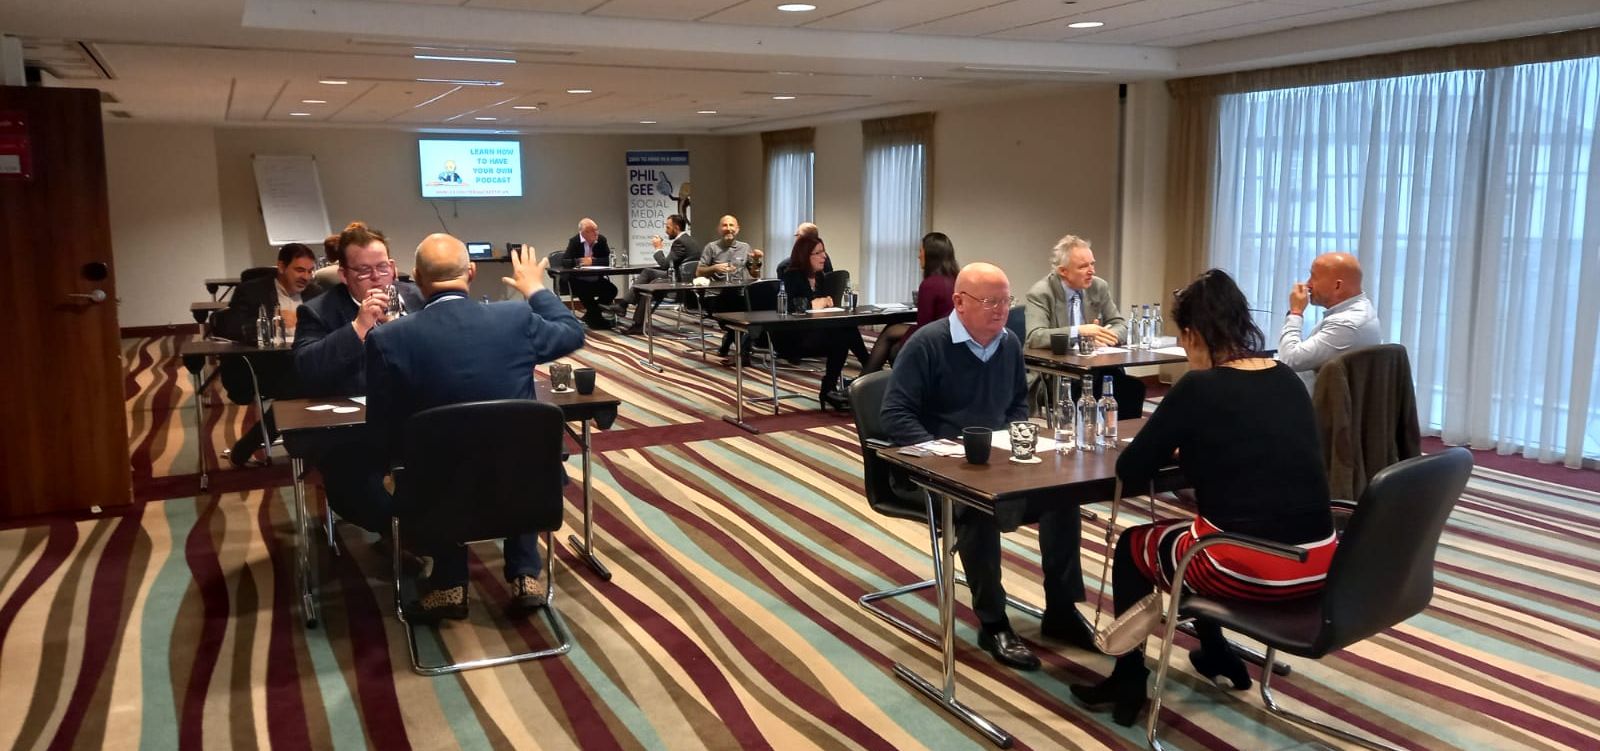 Networking with Gee's Connecting Businesses at Bliss Hotel in Southport